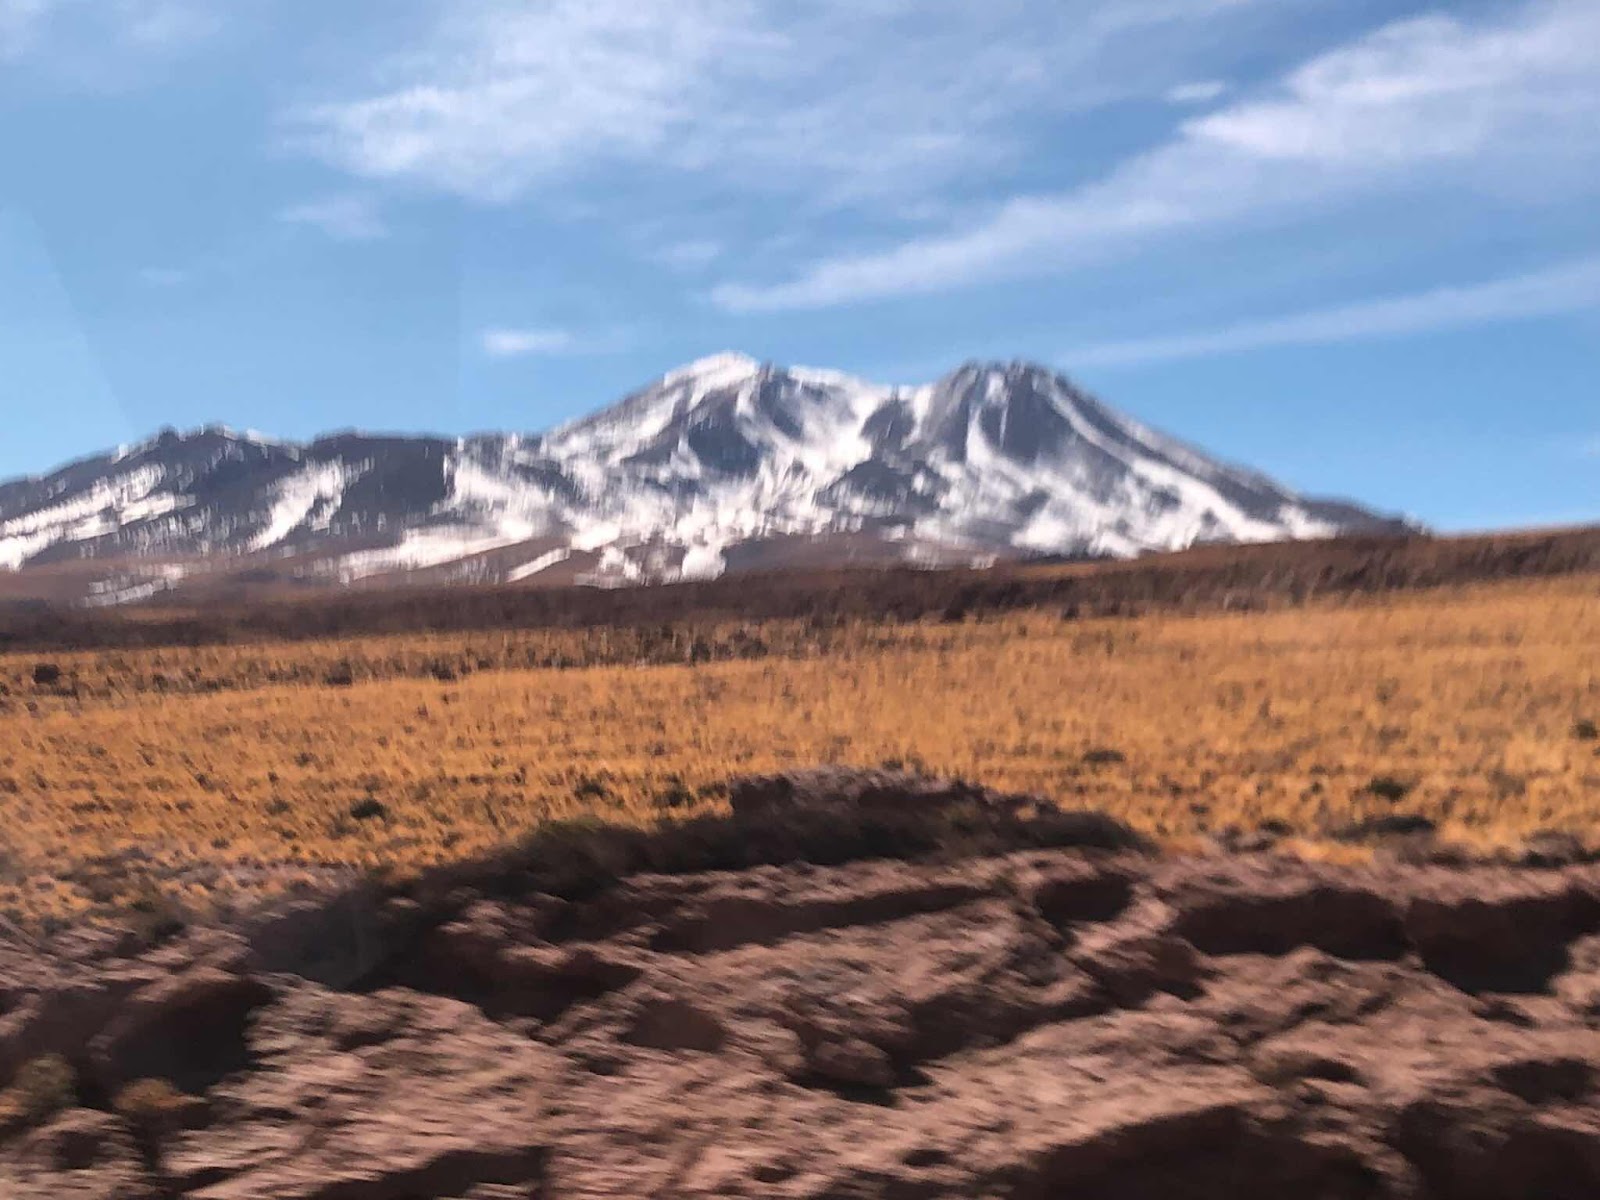 Beautiful snow capped mountains and volcanoes as seen in San Pedro de Atacama (Source: Palmia Observatory)